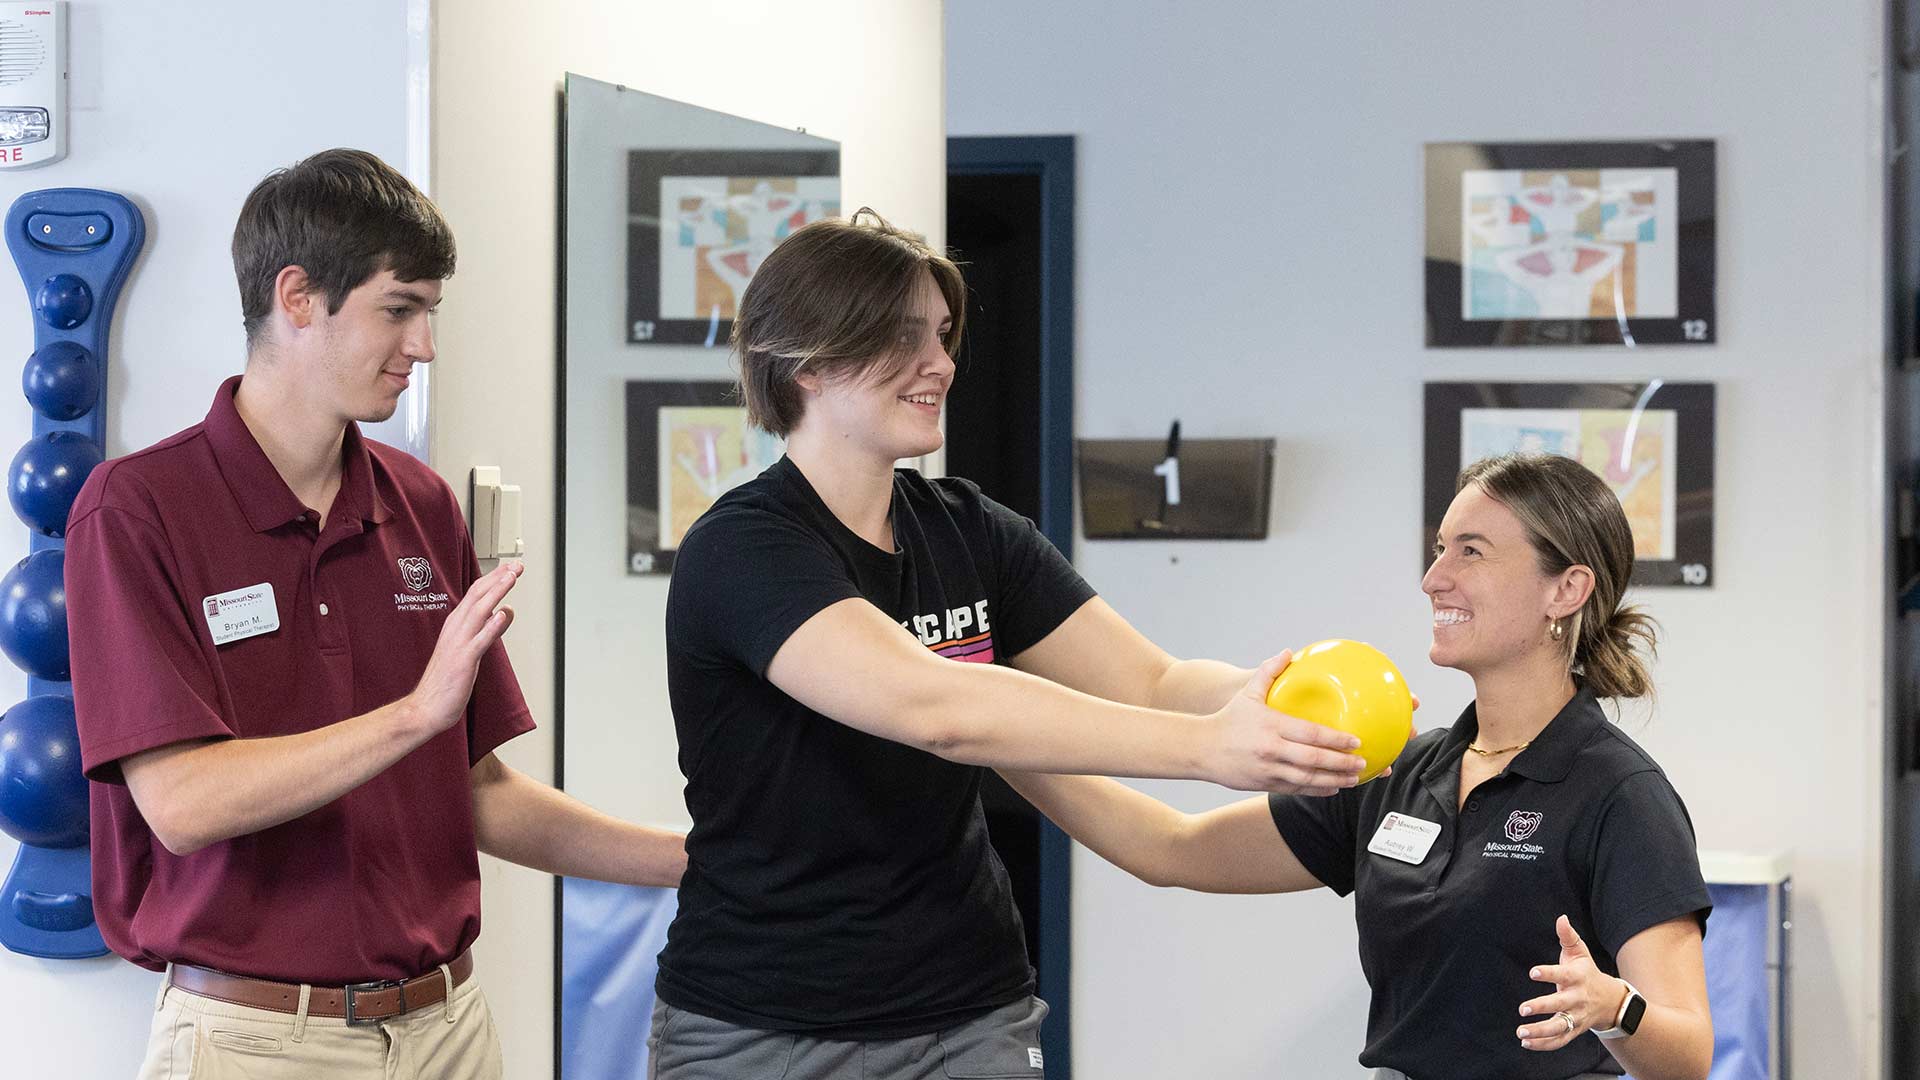 Two Missouri State physical therapy students guide a teenager through a rehab activity. The teenager is moving a medicine ball from side to side.